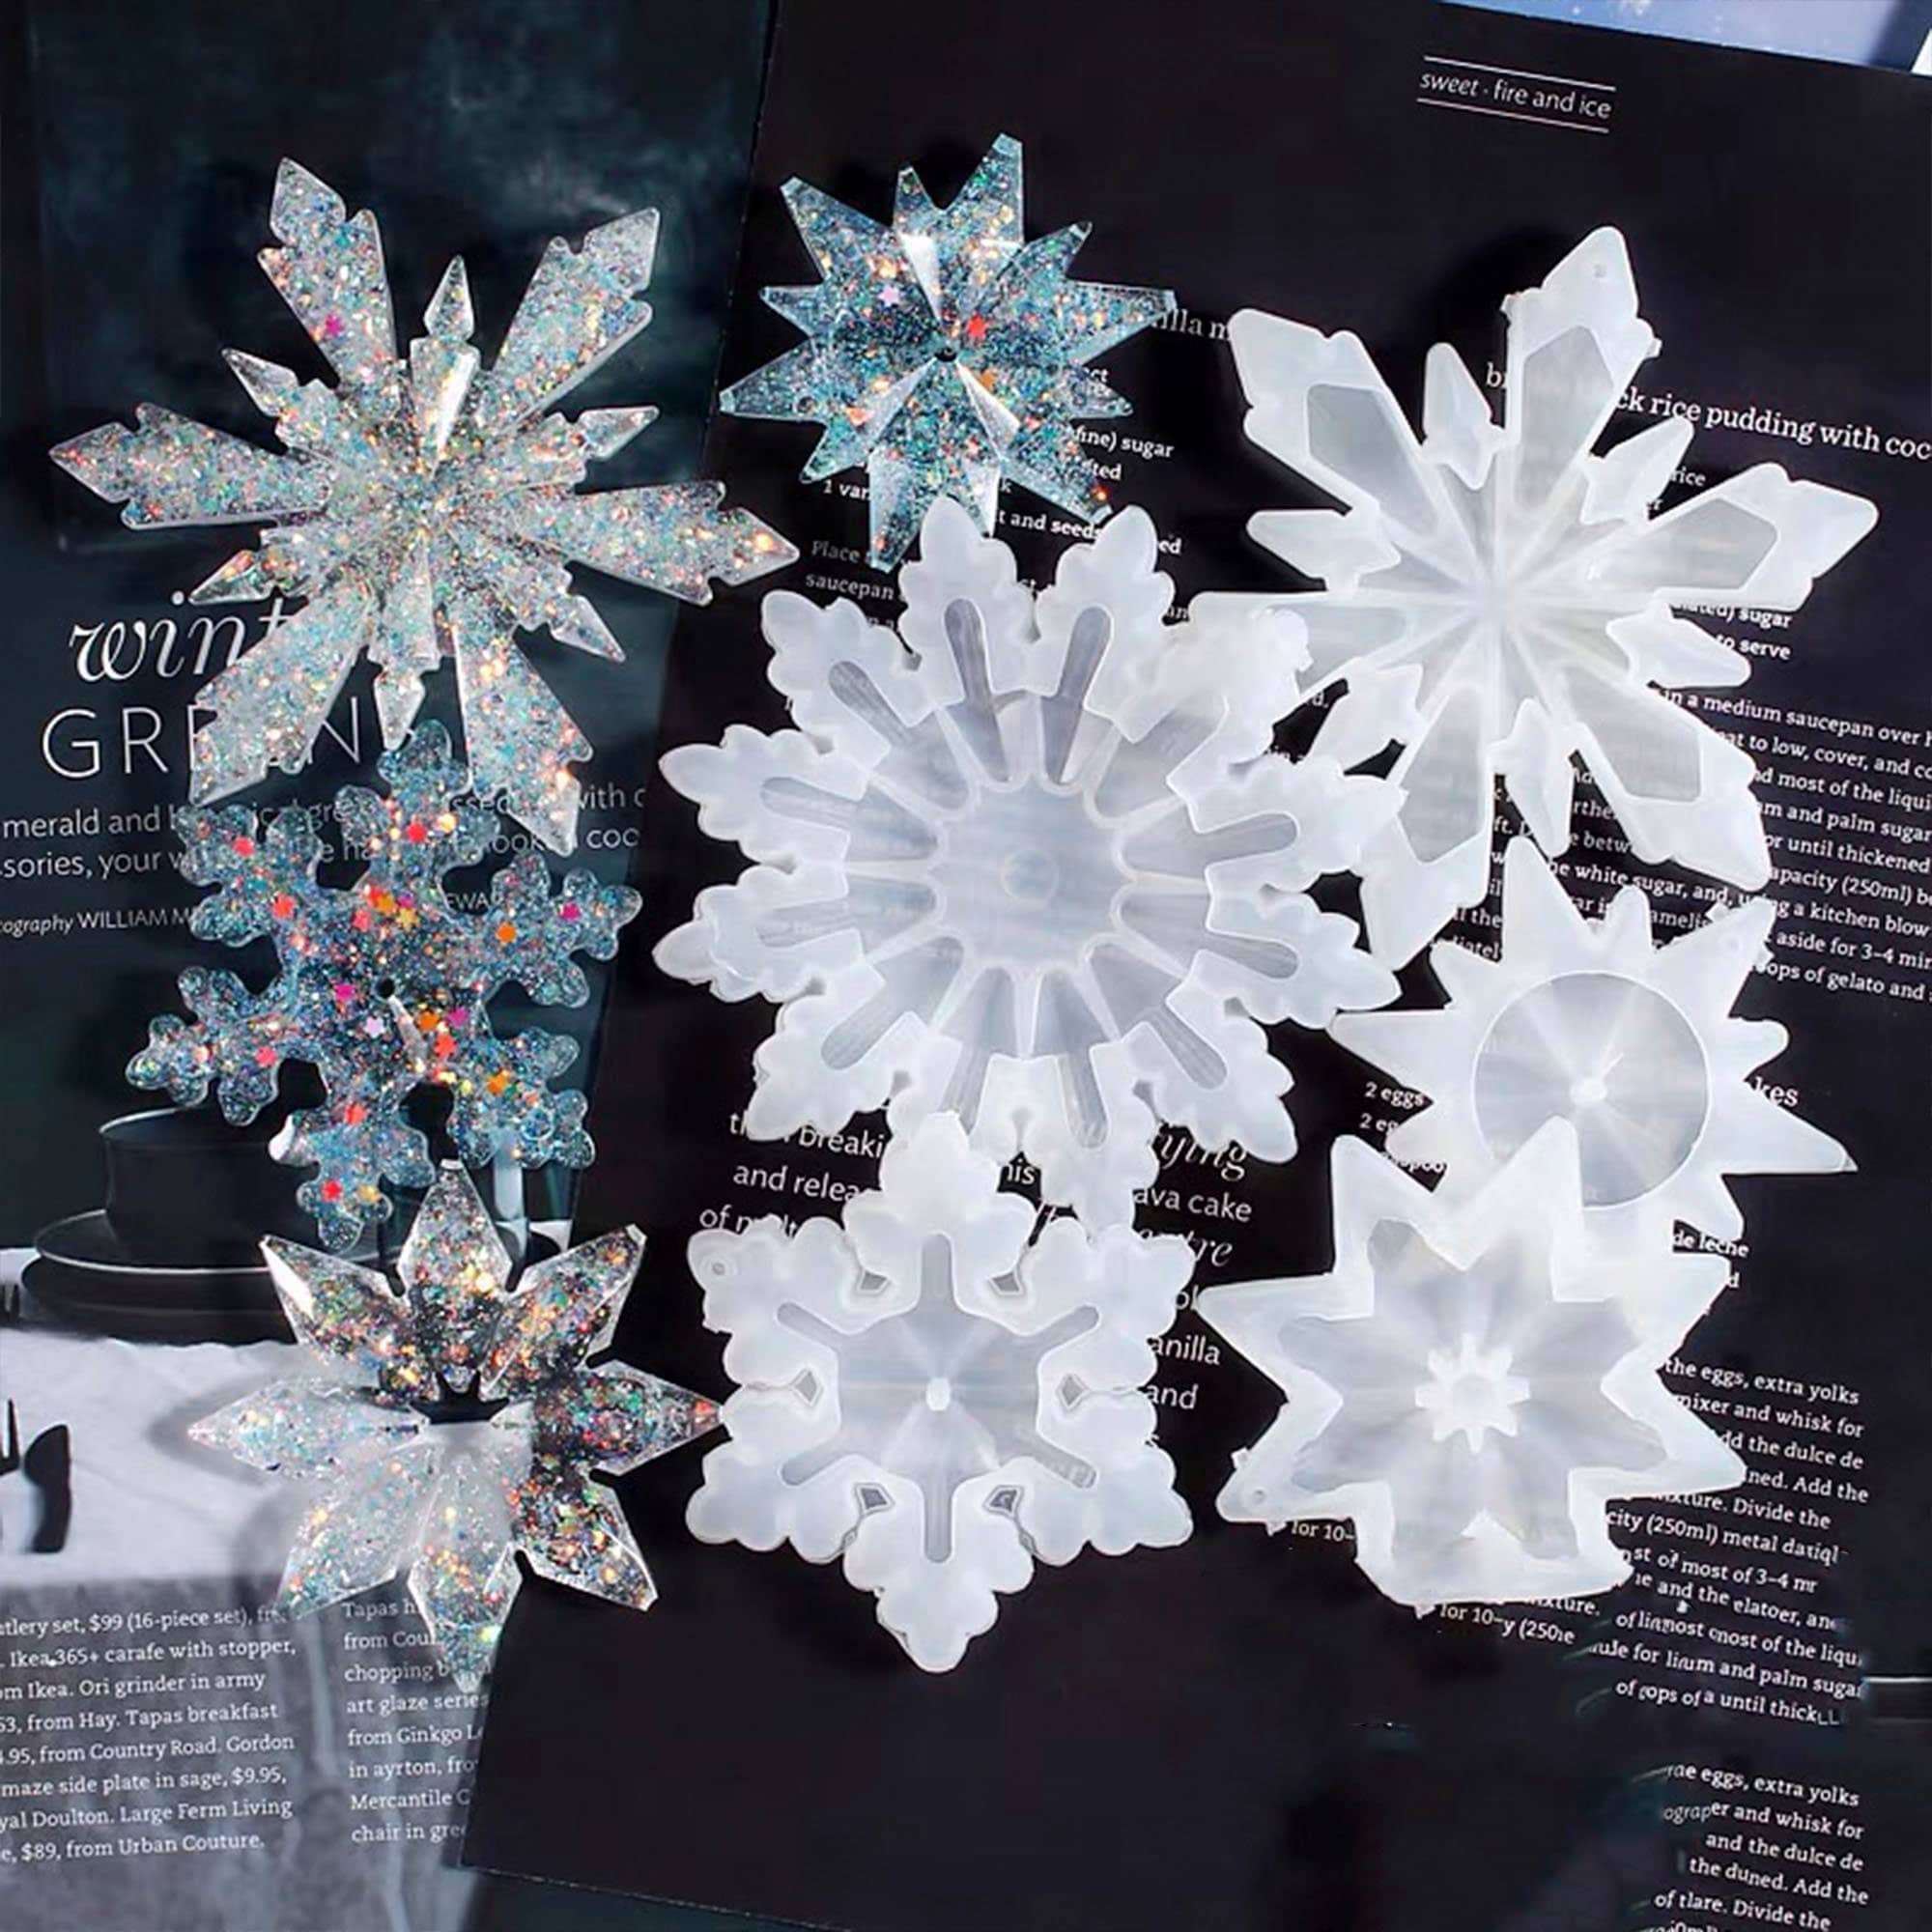 2PCS Snowflake Silicone Resin Casting Molds for DIY Silicone Pendant  Mold,Resin Mold Snowflake for Jewelry Pendant,Crafts,Ornament